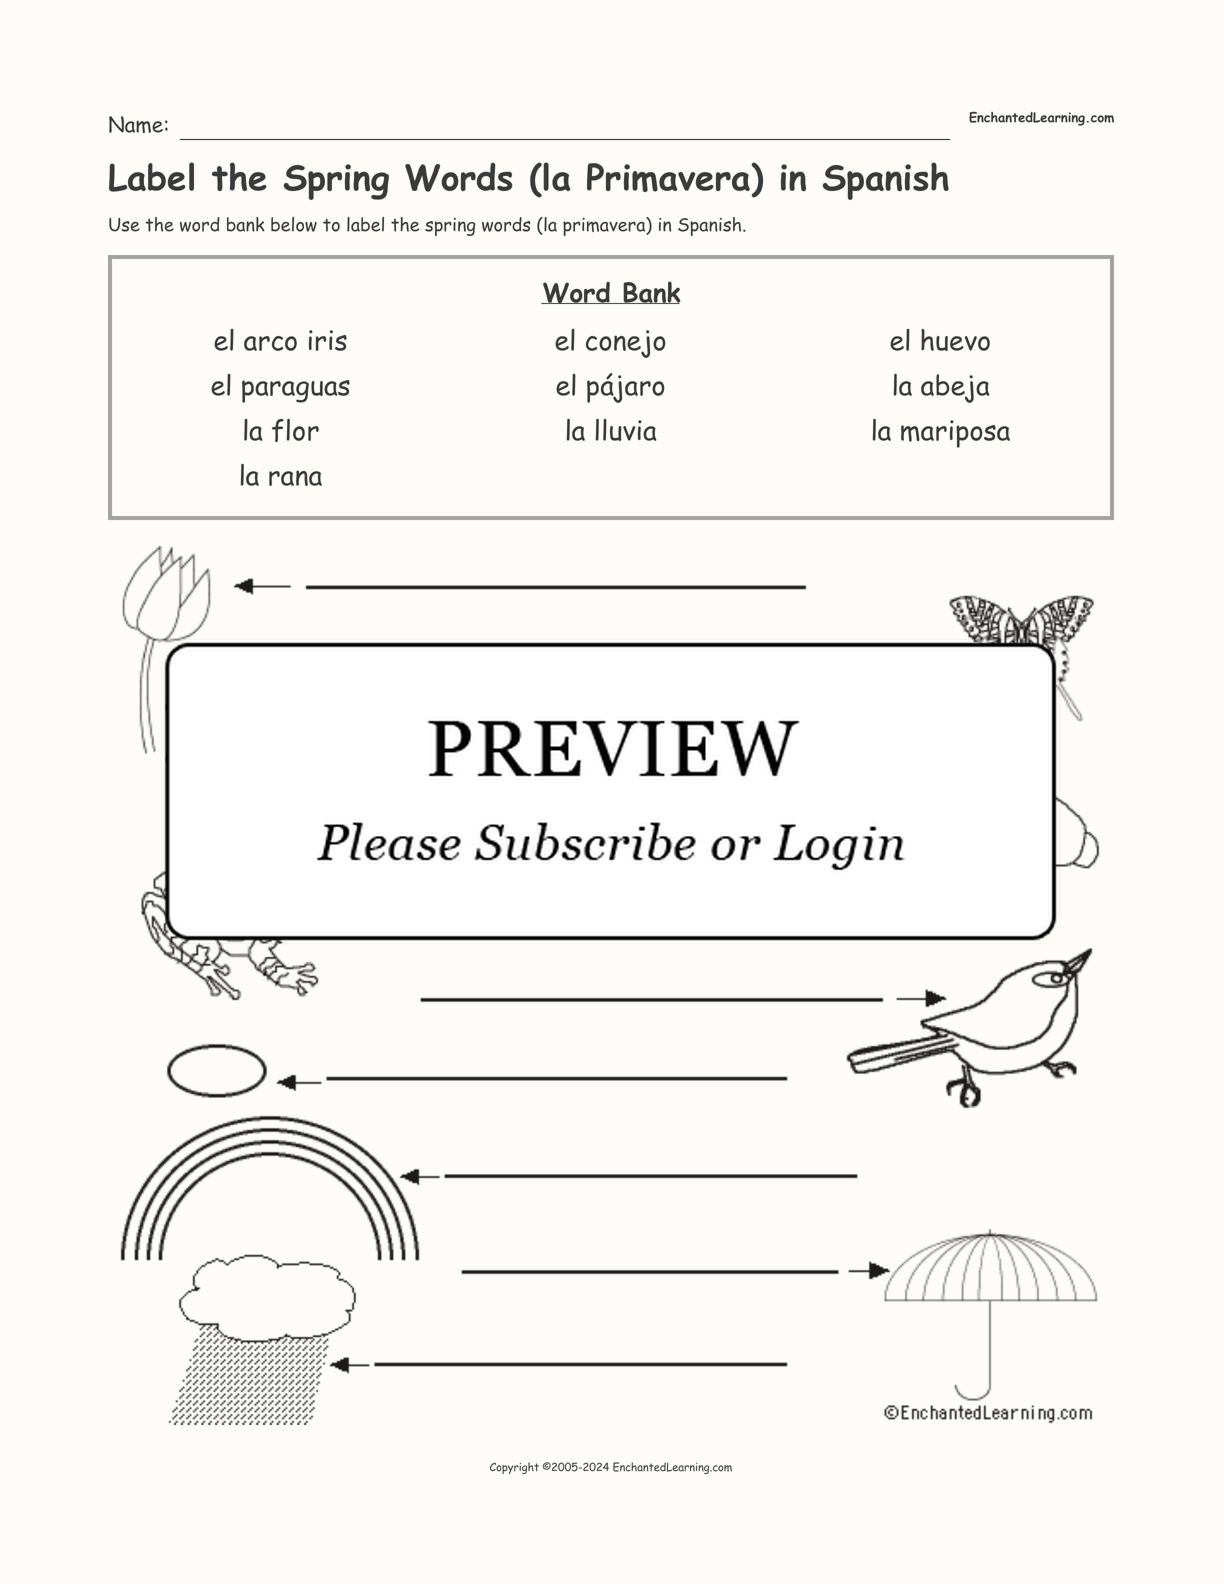 Label the Spring Words (la Primavera) in Spanish interactive worksheet page 1